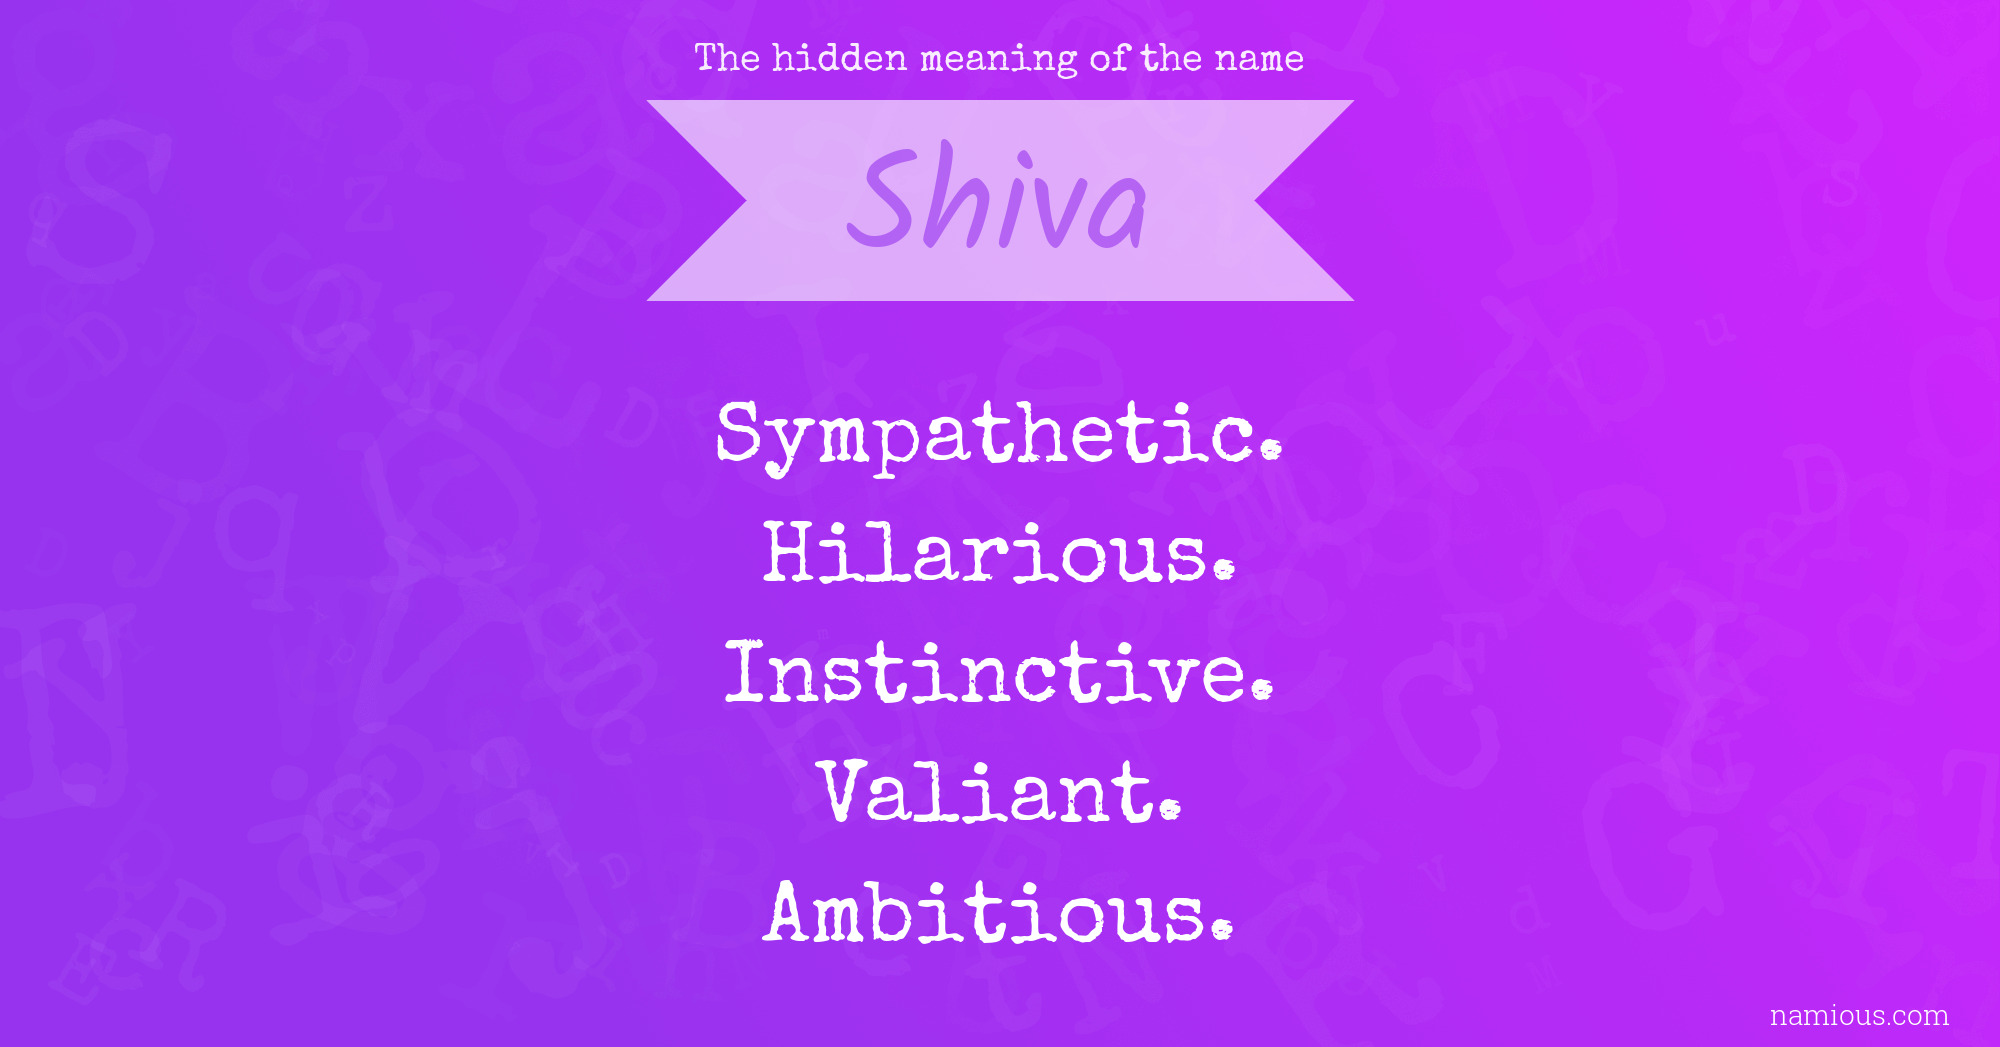 The hidden meaning of the name Shiva